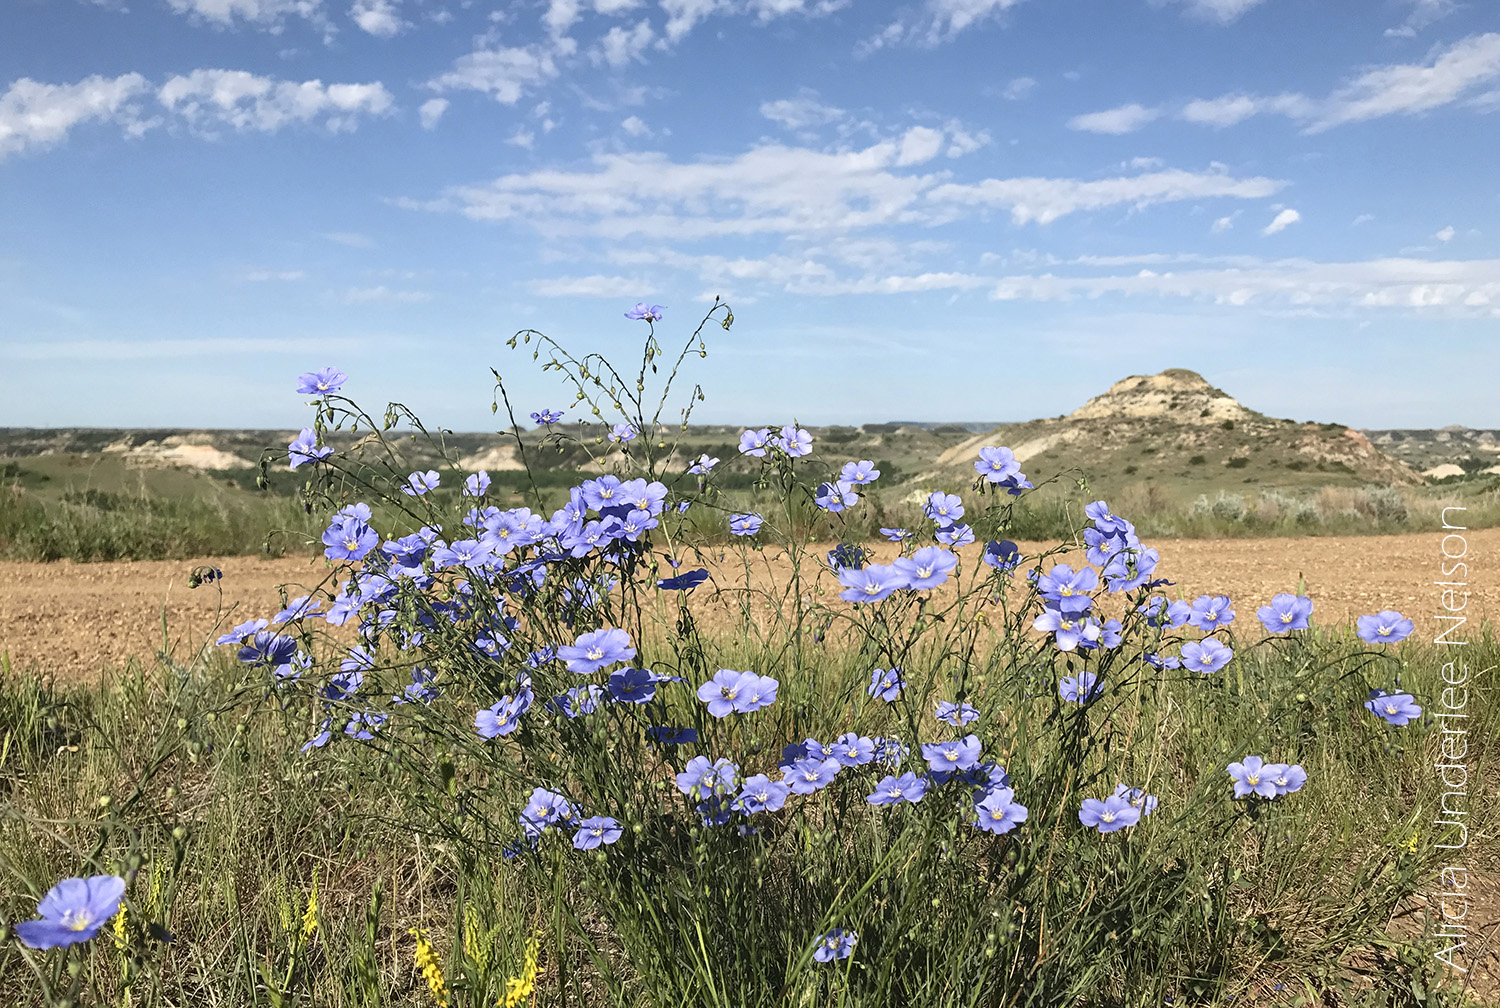 Flowers in the badlands